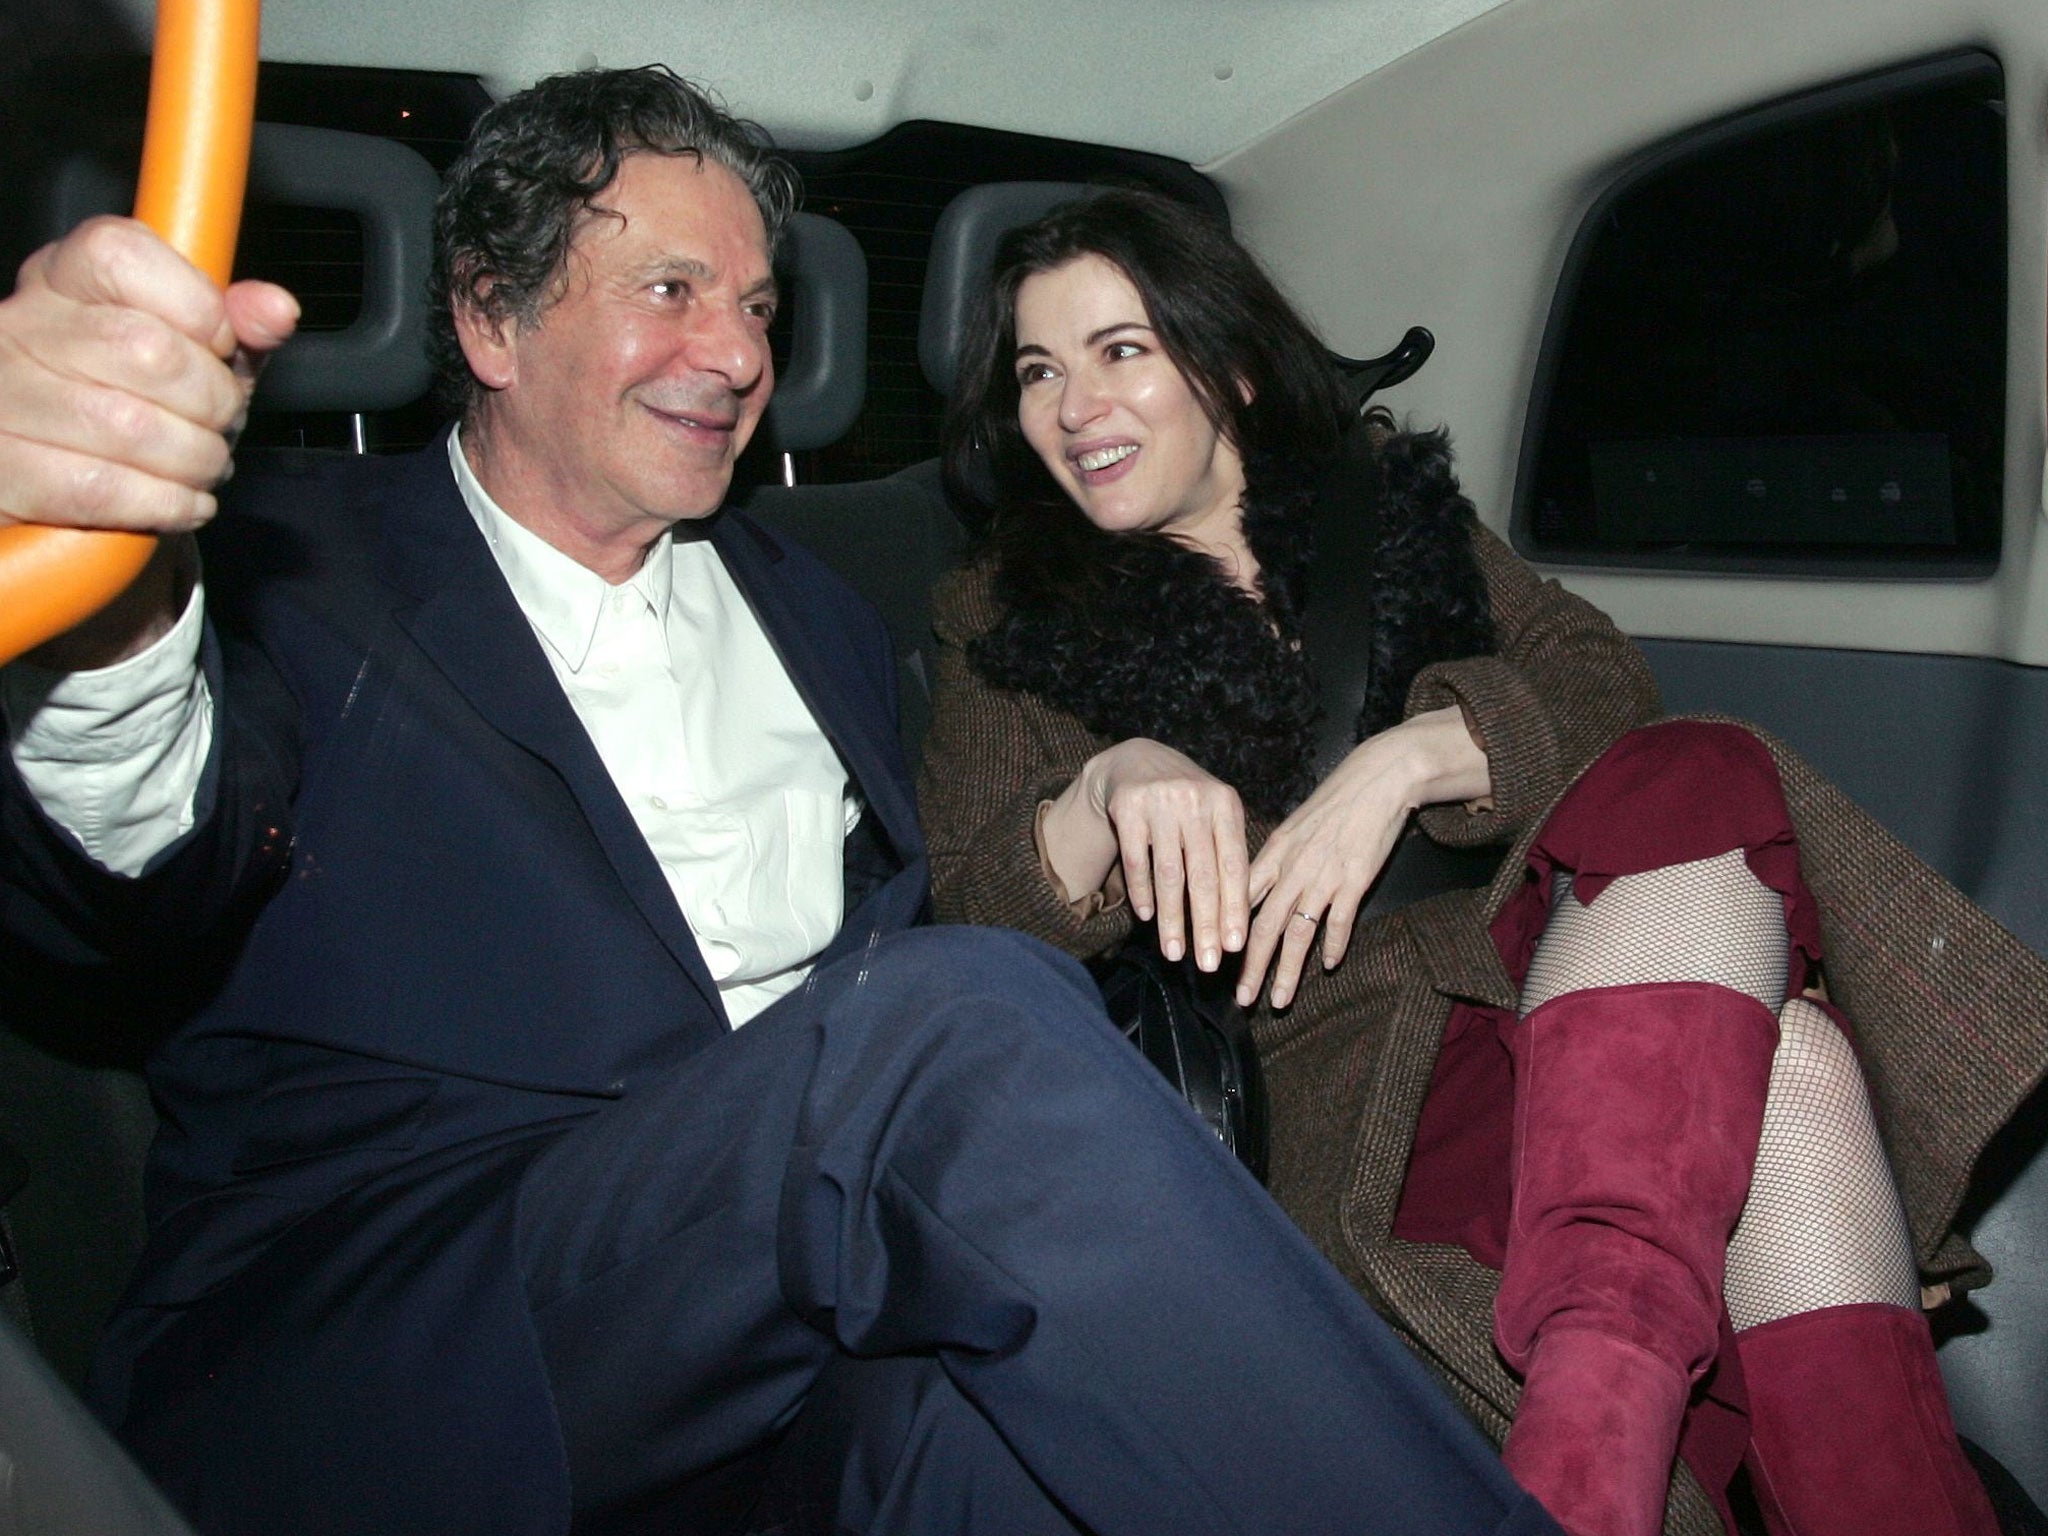 Charles Saatchi with his wife, Nigella Lawson, in March last year